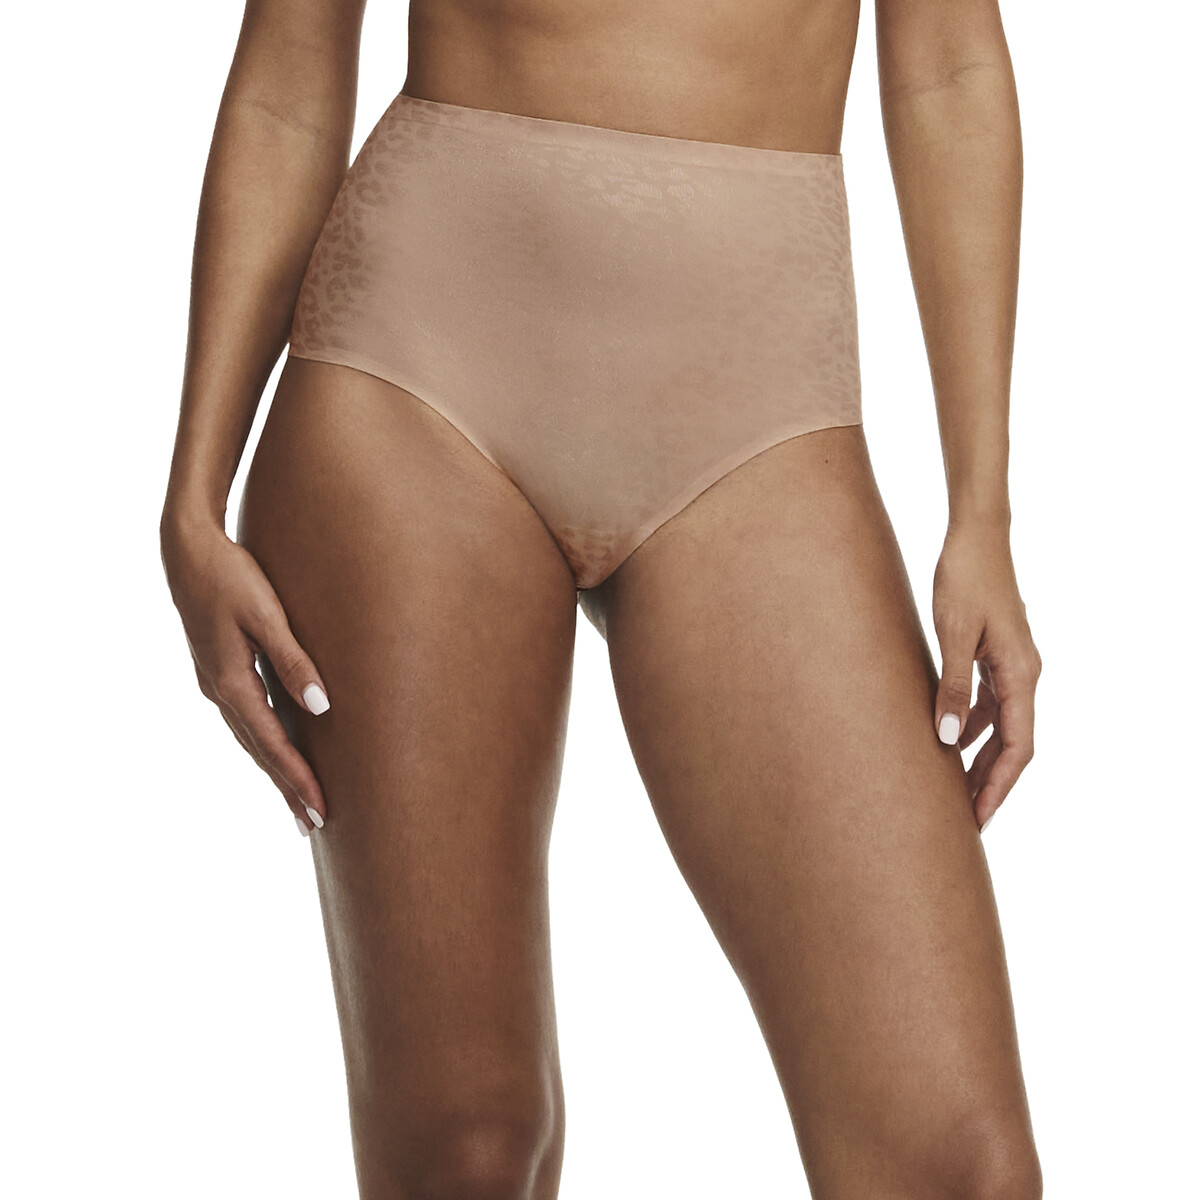 Soft Stretch Full Knickers, One Size Fits All